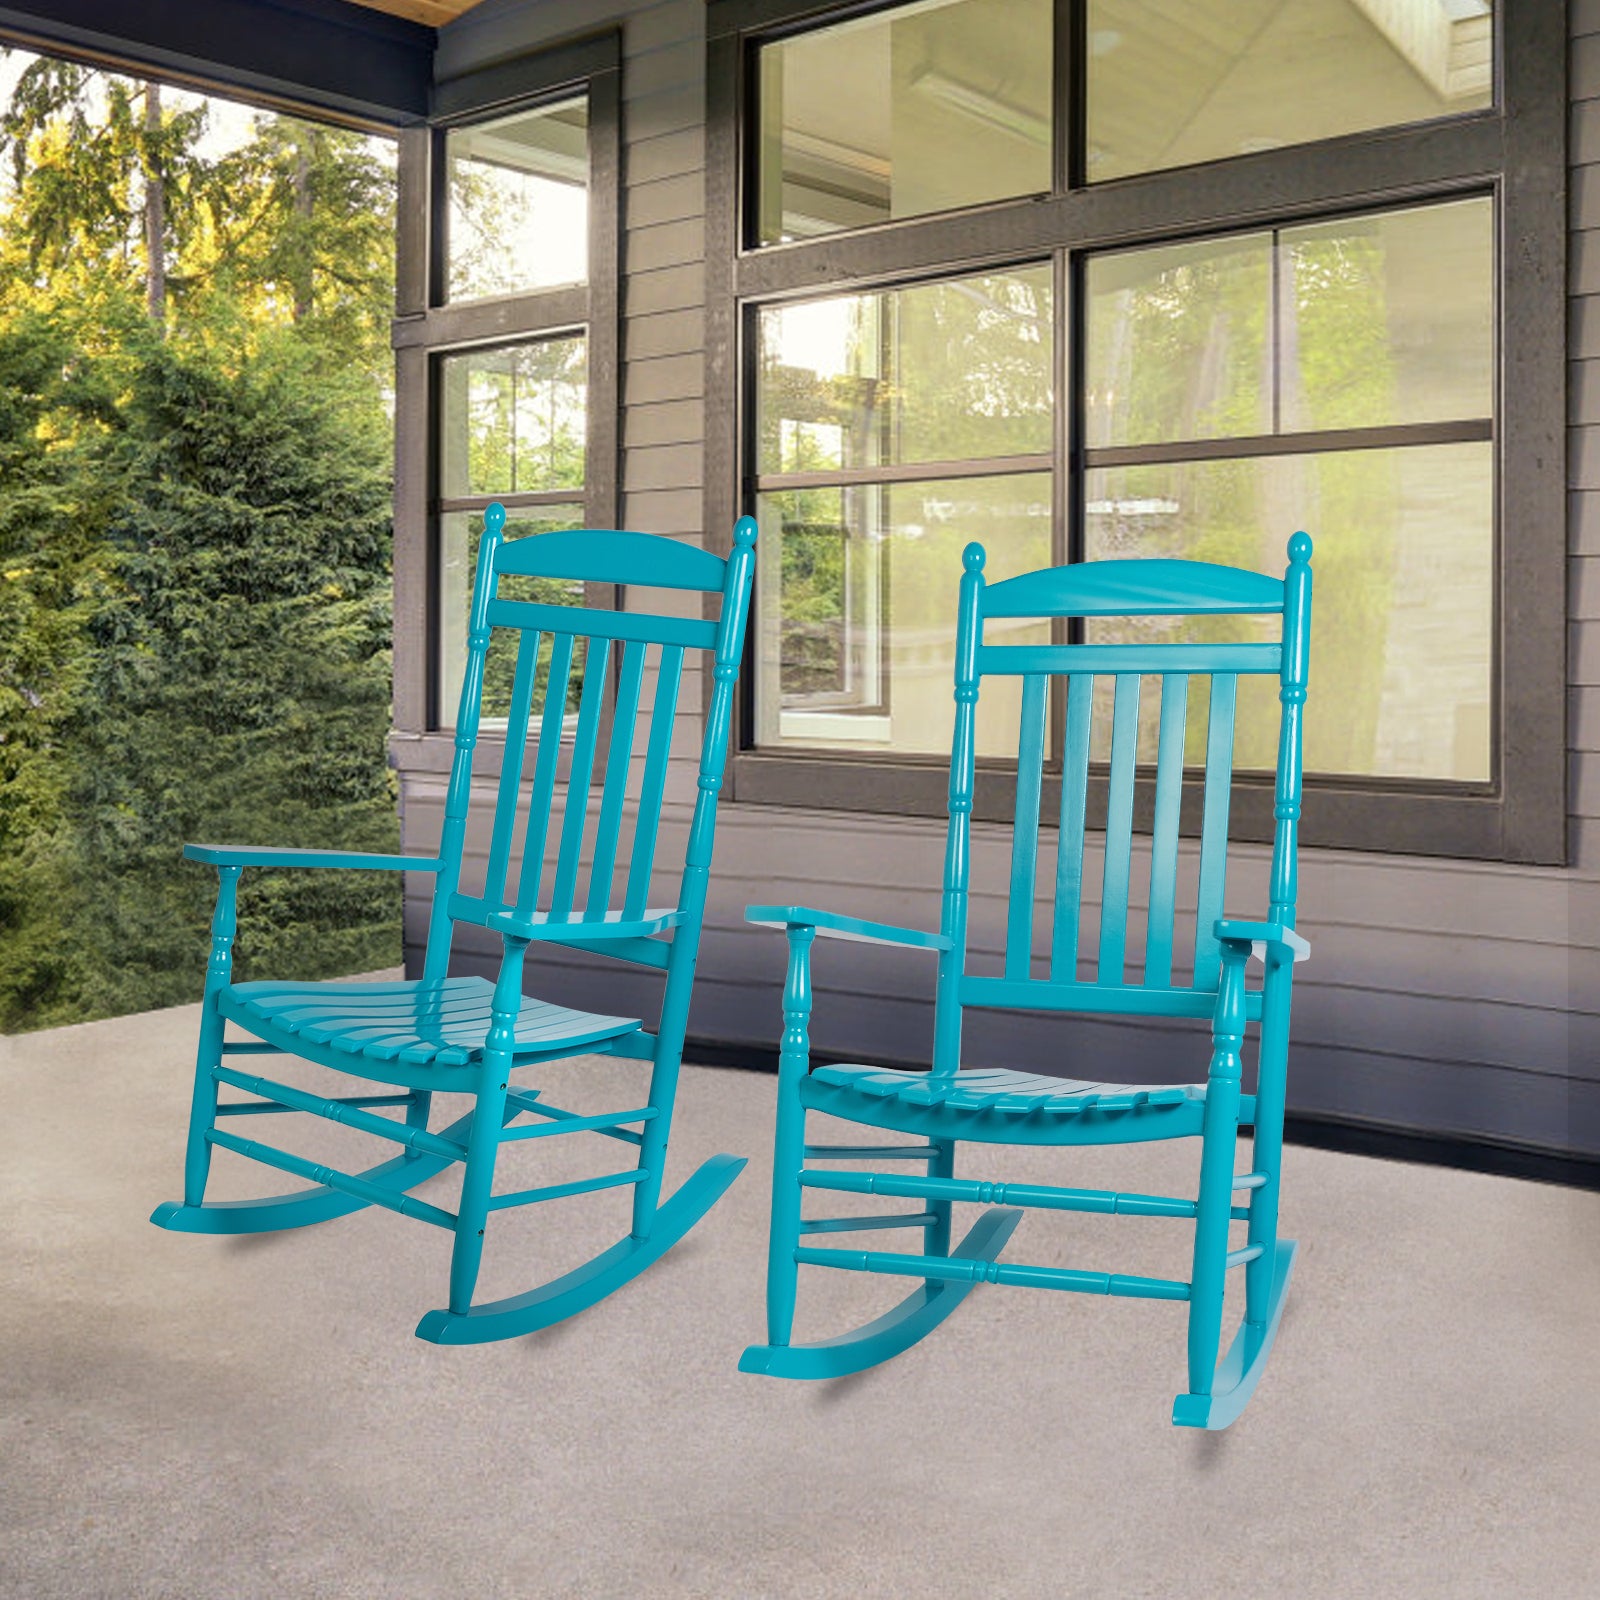 Set of 2 Outdoor Rocking Chairs Wooden High Back Rocker with Armrest for Garden Patio, Blue